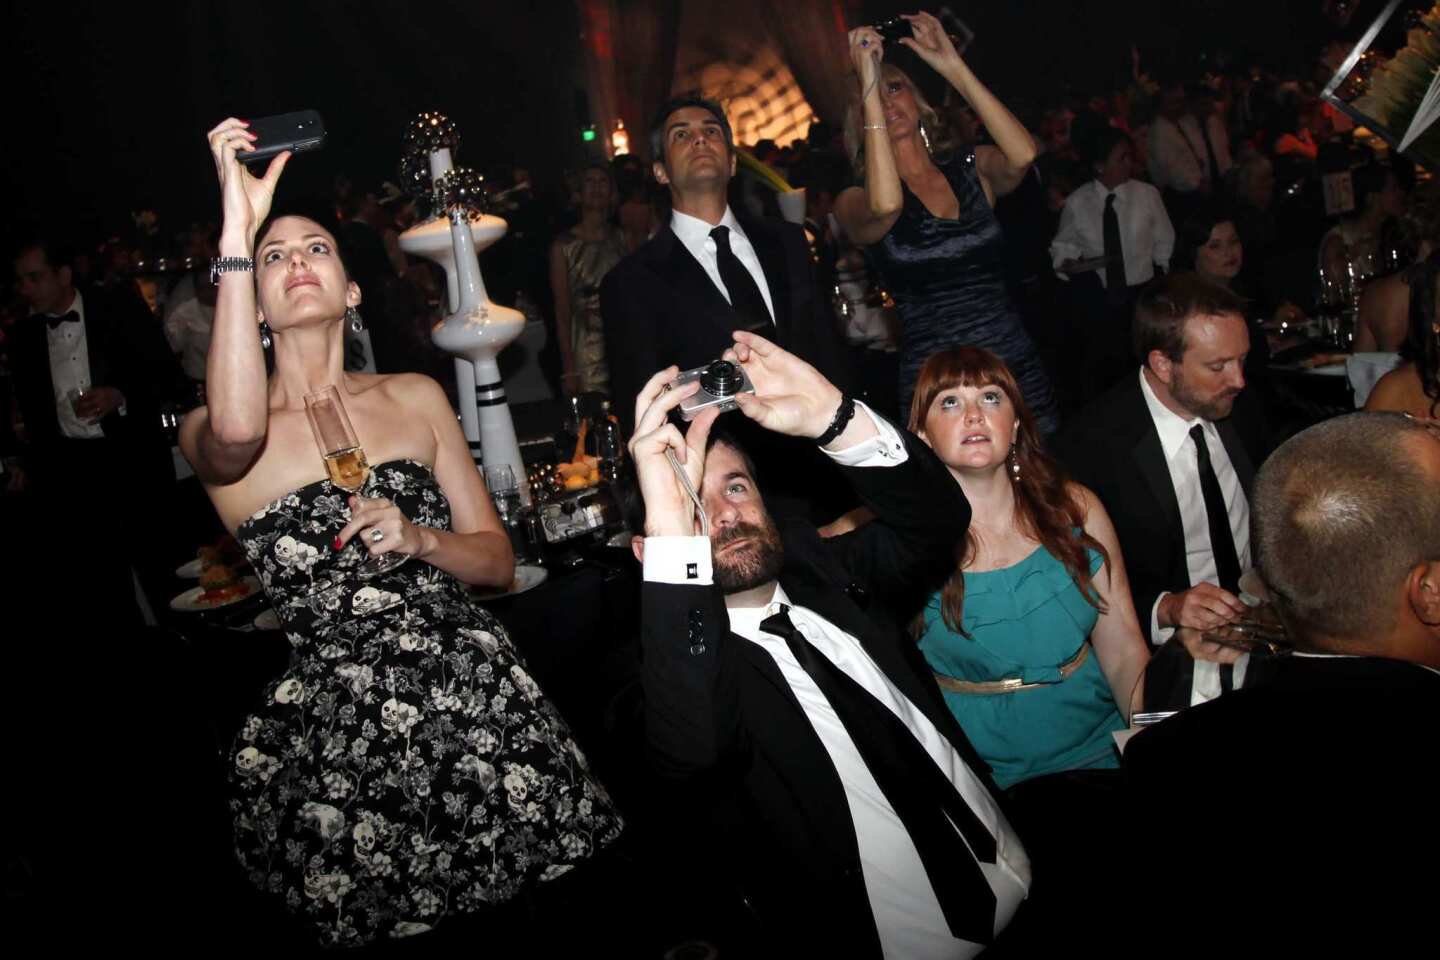 The 2011 Emmy Awards | Governors Ball